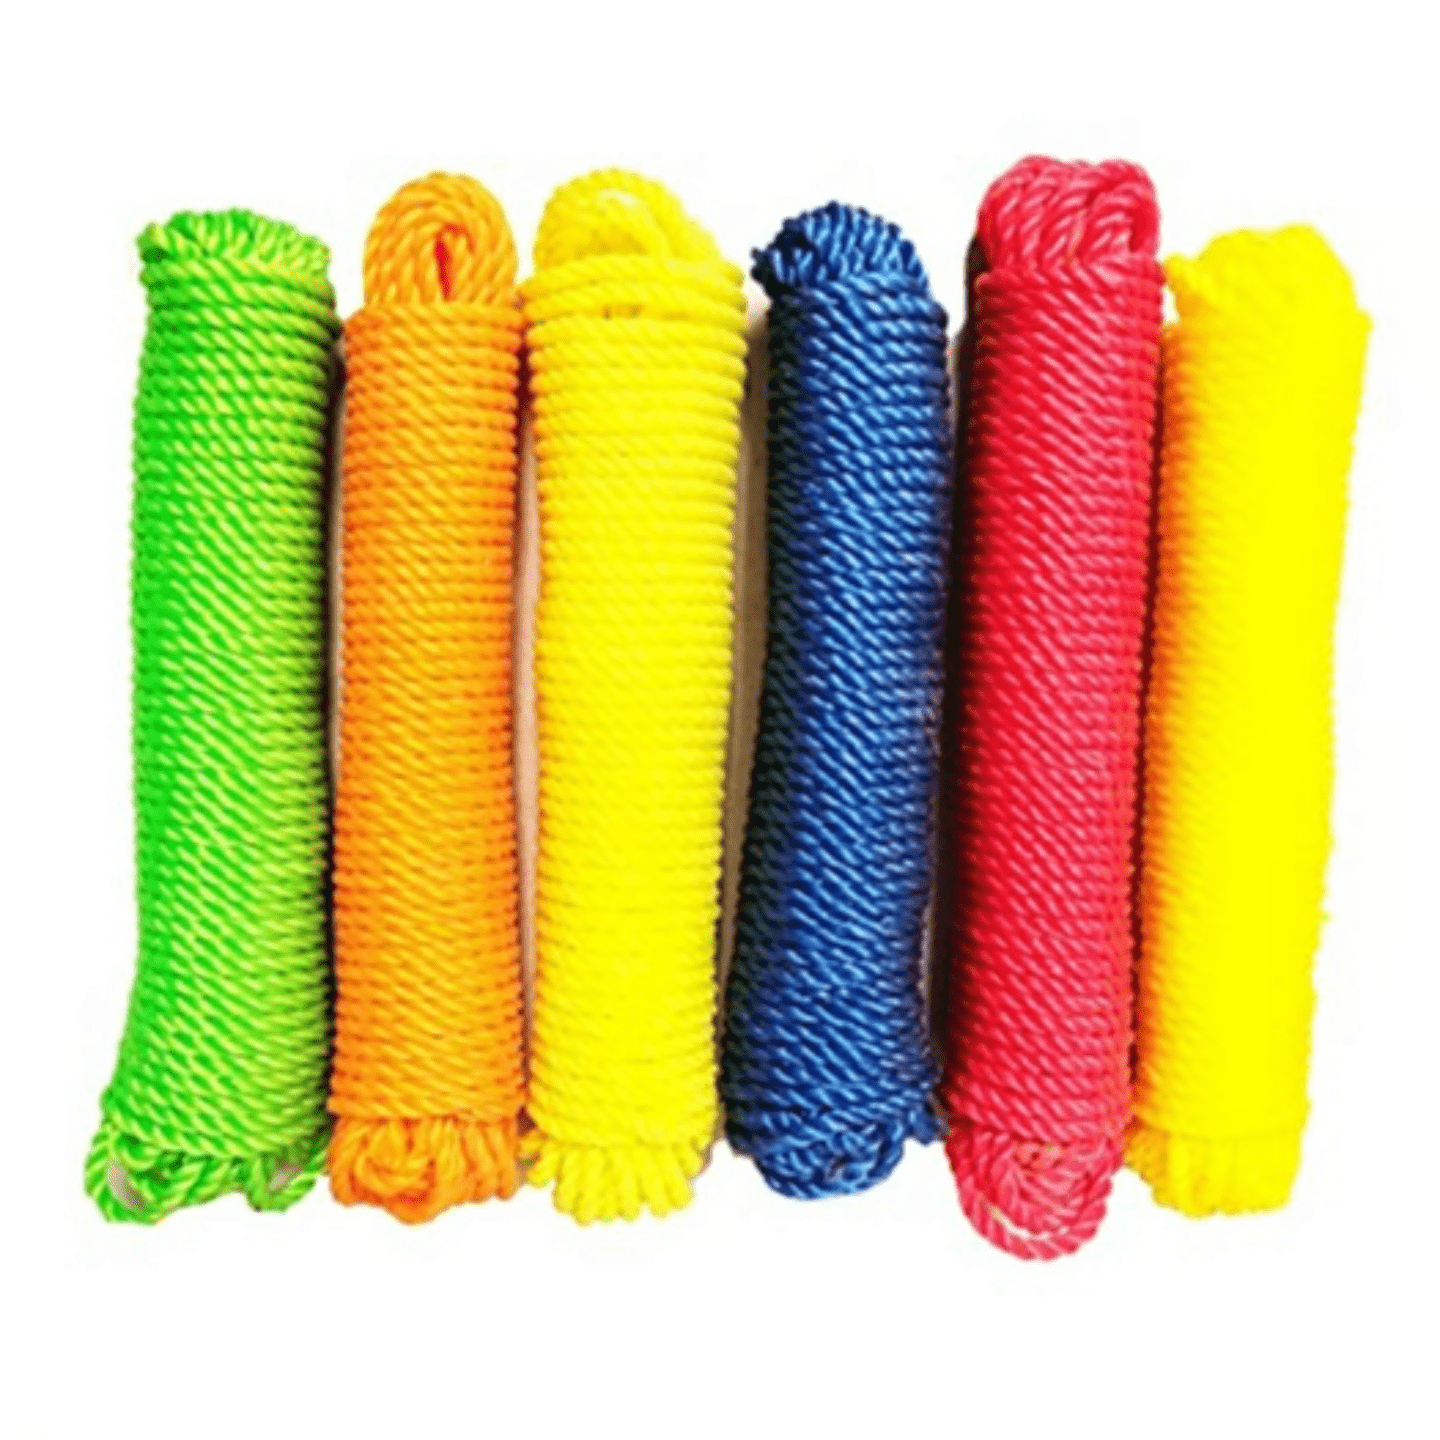 10 Metre long Nylon Rope for cloth hanging